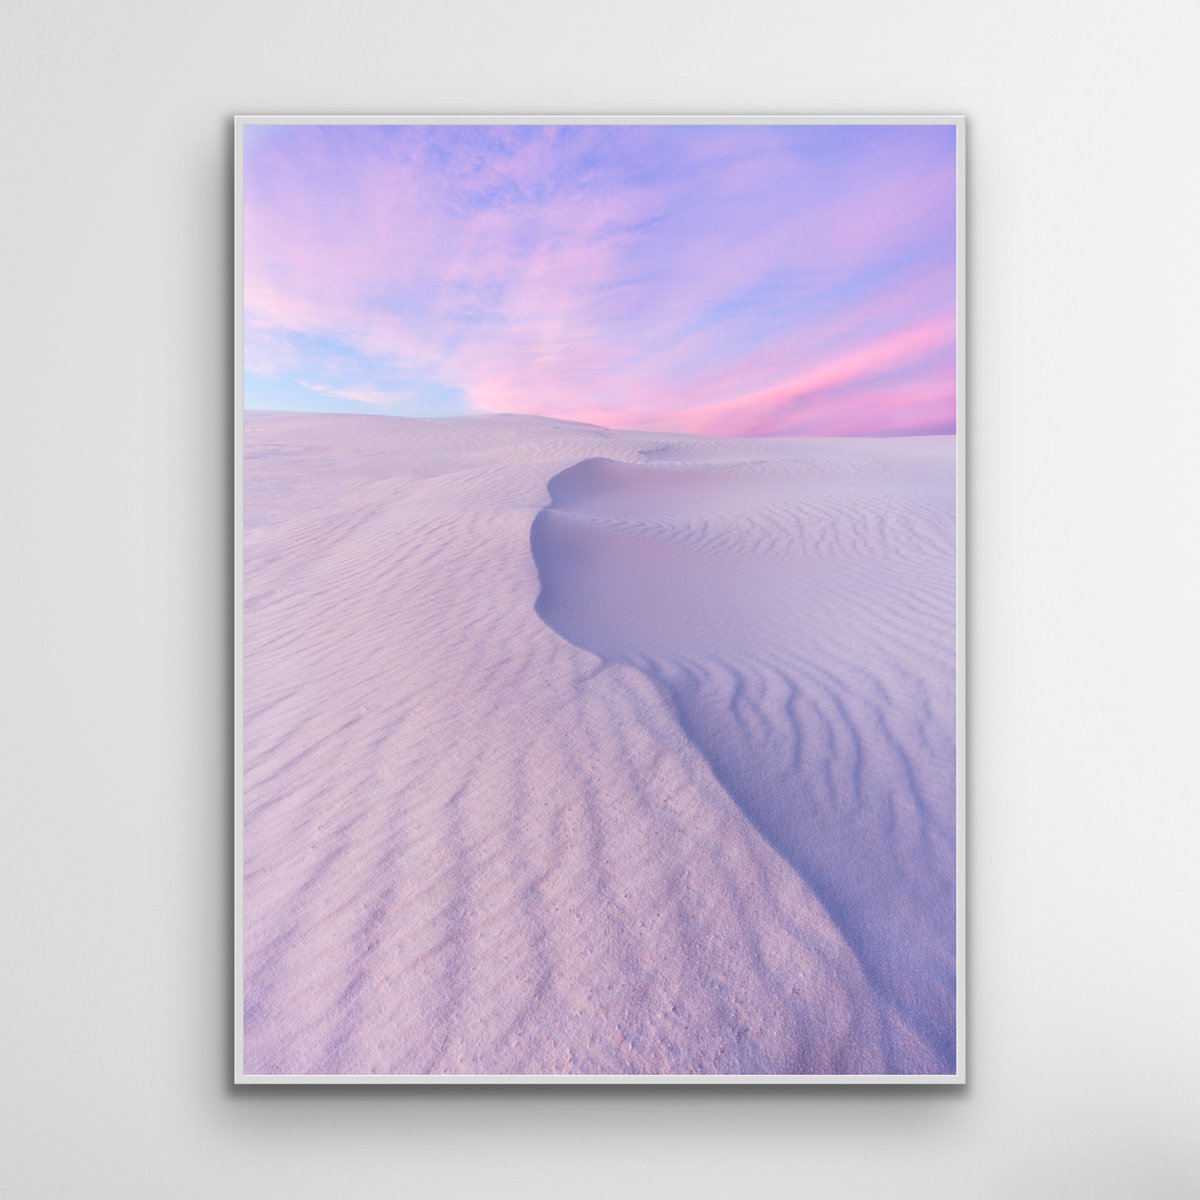 White Sands Symphony - FRAMED - Limited Edition by Francesco Carucci